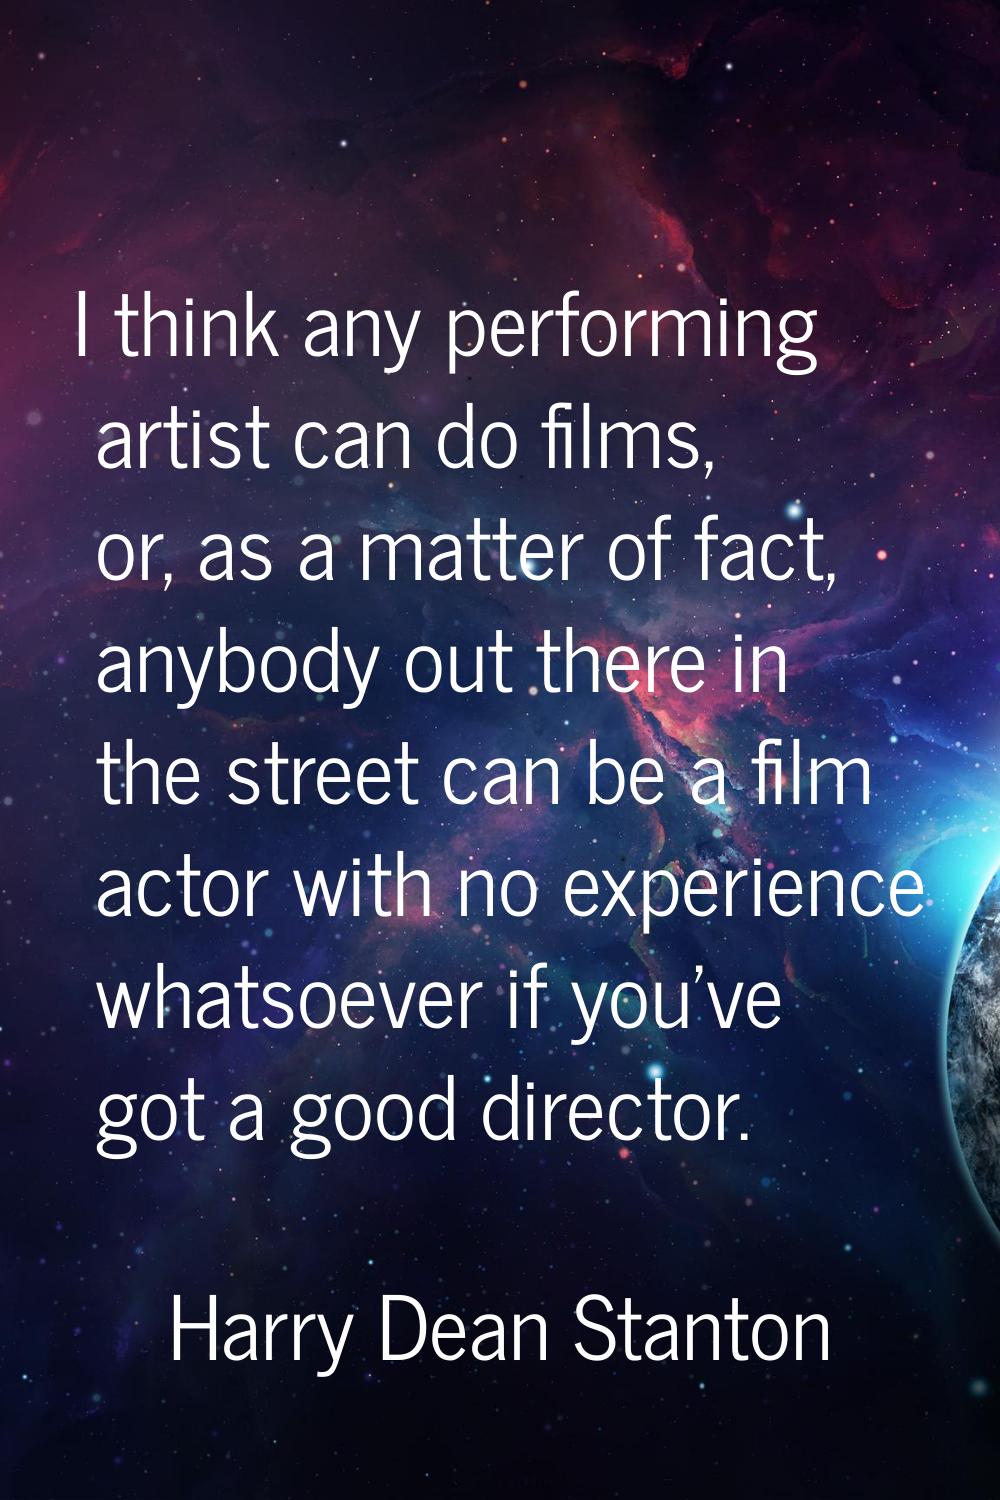 I think any performing artist can do films, or, as a matter of fact, anybody out there in the stree